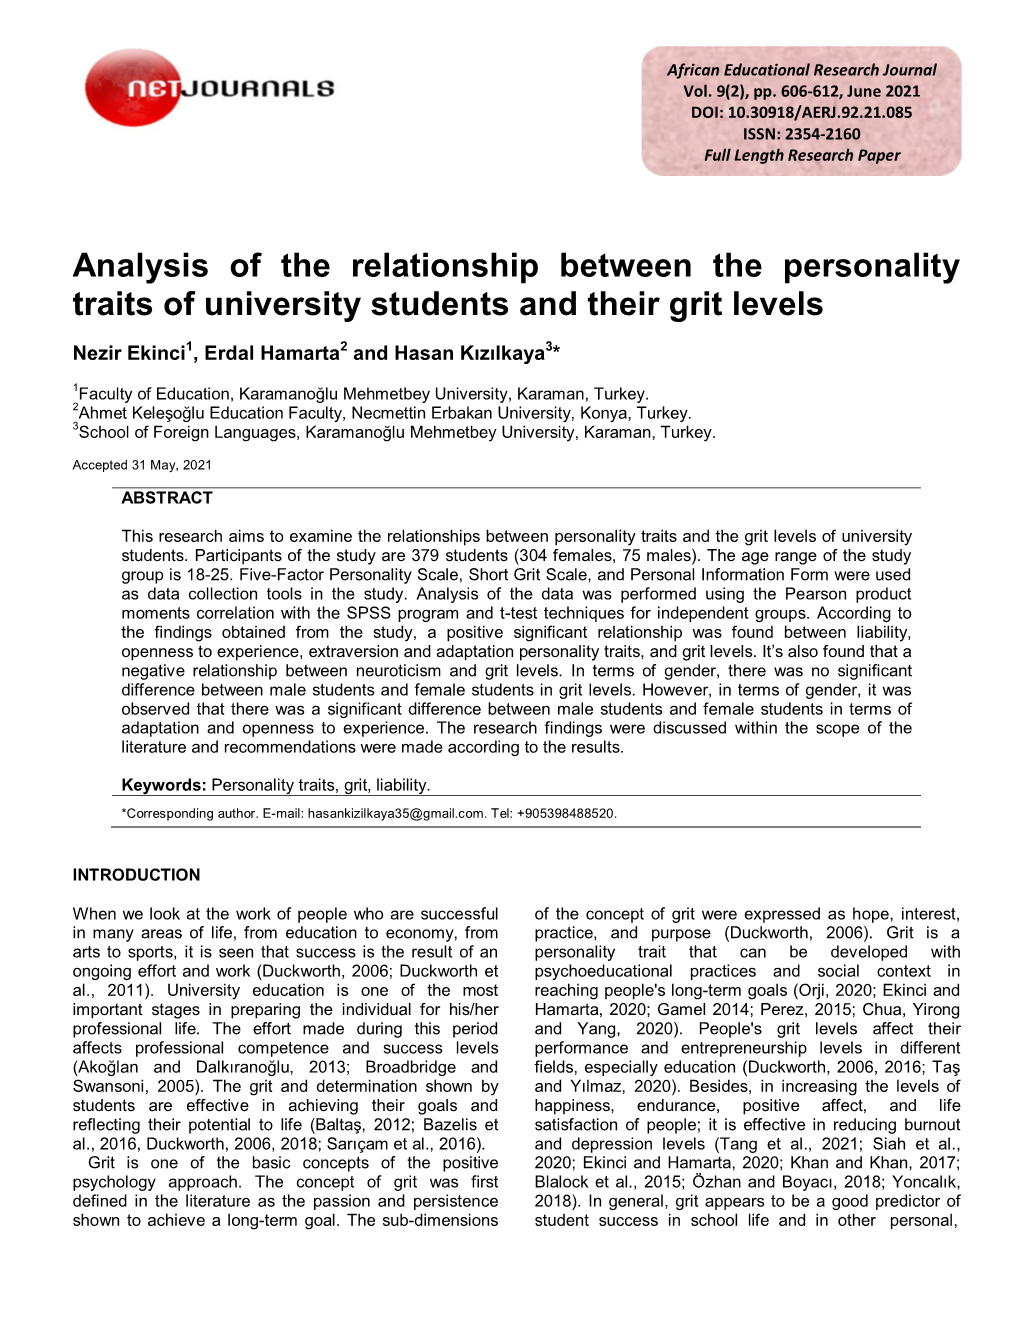 Analysis of the Relationship Between the Personality Traits of University Students and Their Grit Levels